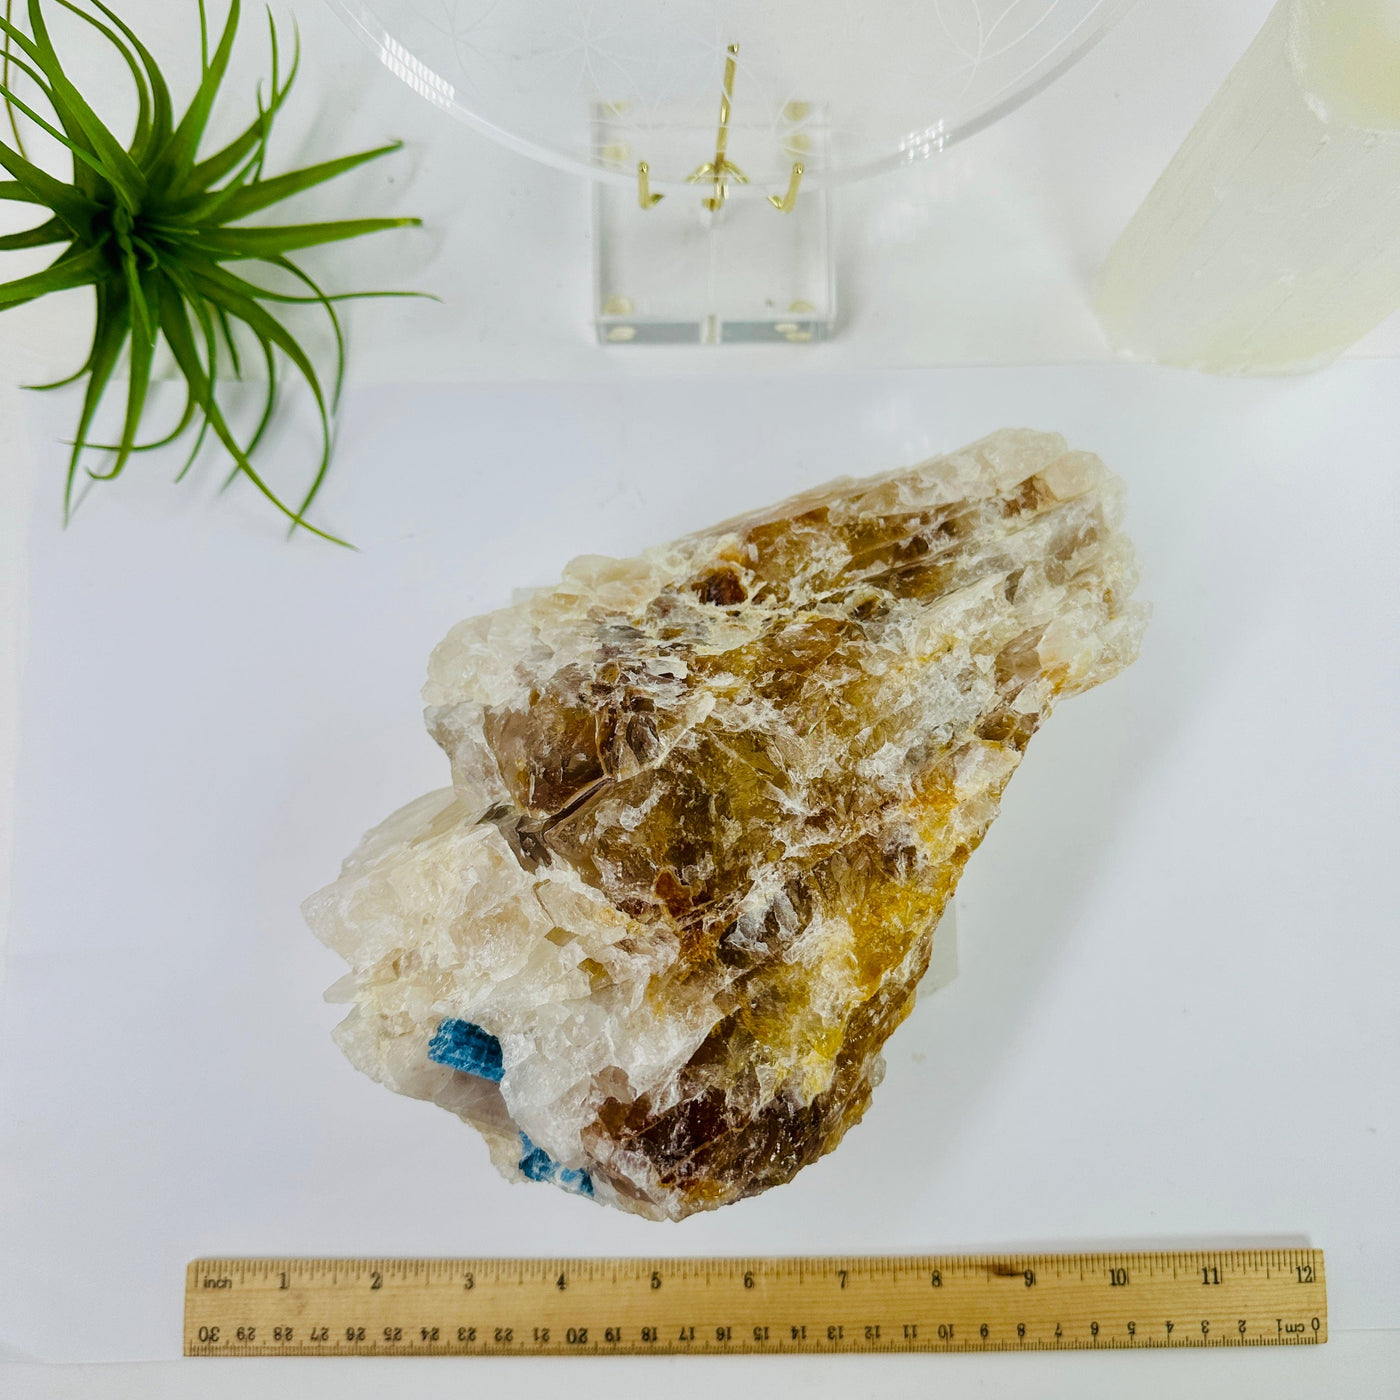 Aquamarine in matrix - aquamarine crystal embedded in large natural rough stone top view with ruler for size reference